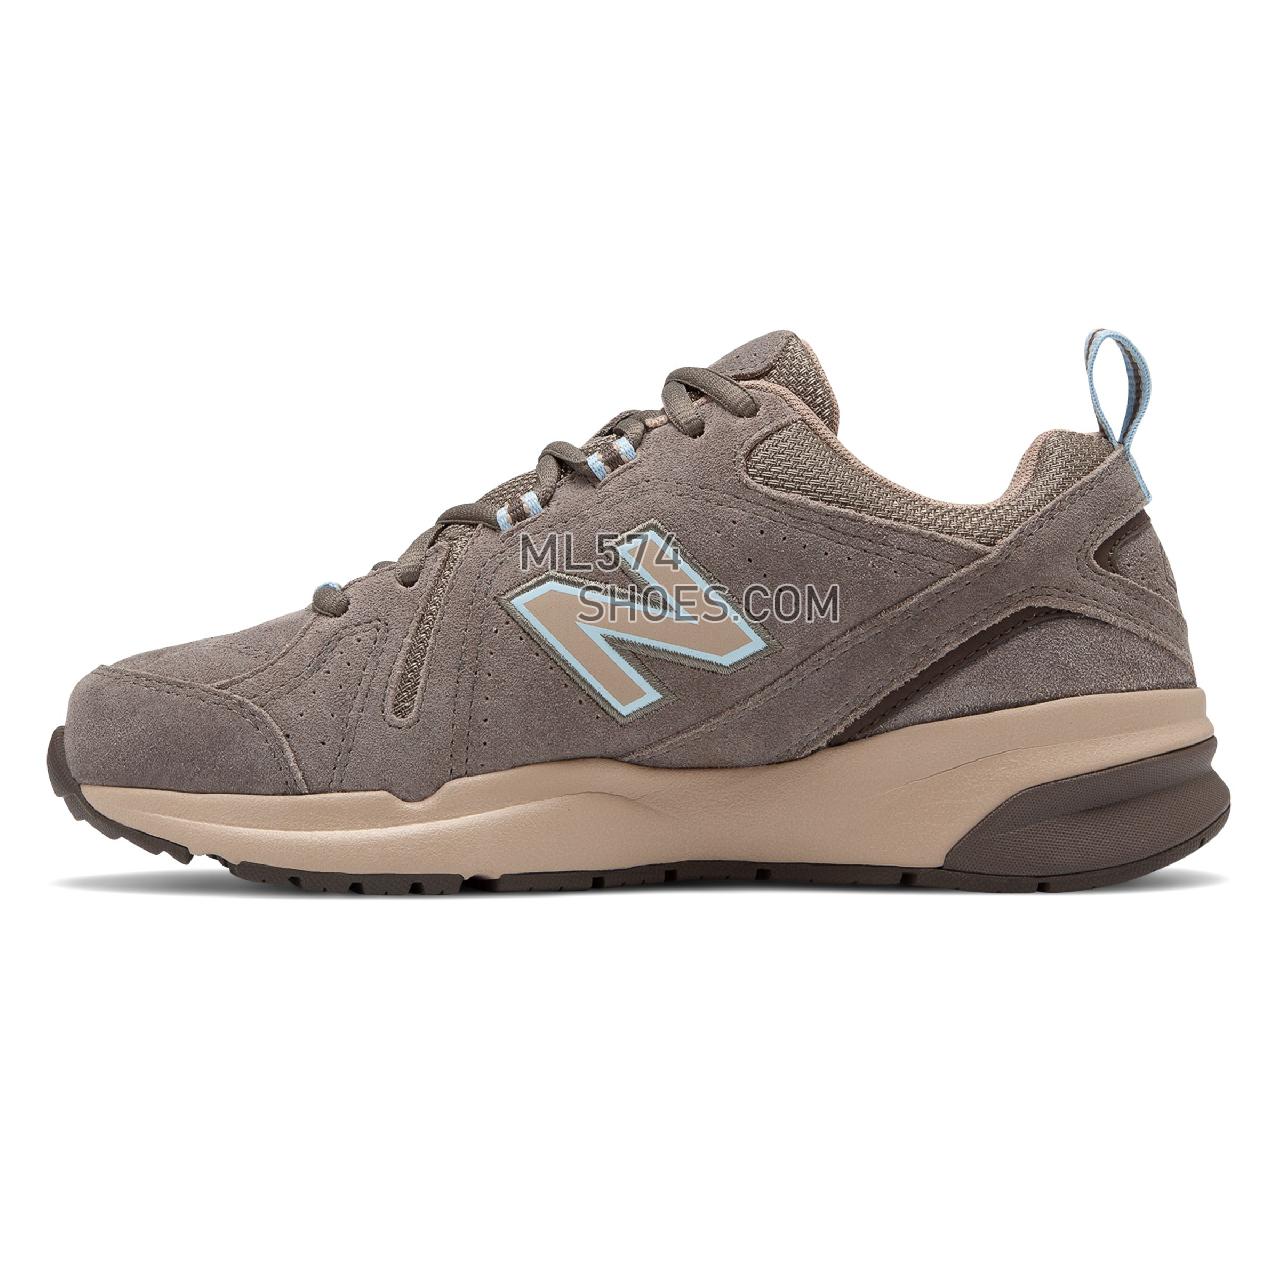 New Balance 608v5 - Women's Everyday Trainers - Bungee Chocolate with Brick and Wren - WX608UB5